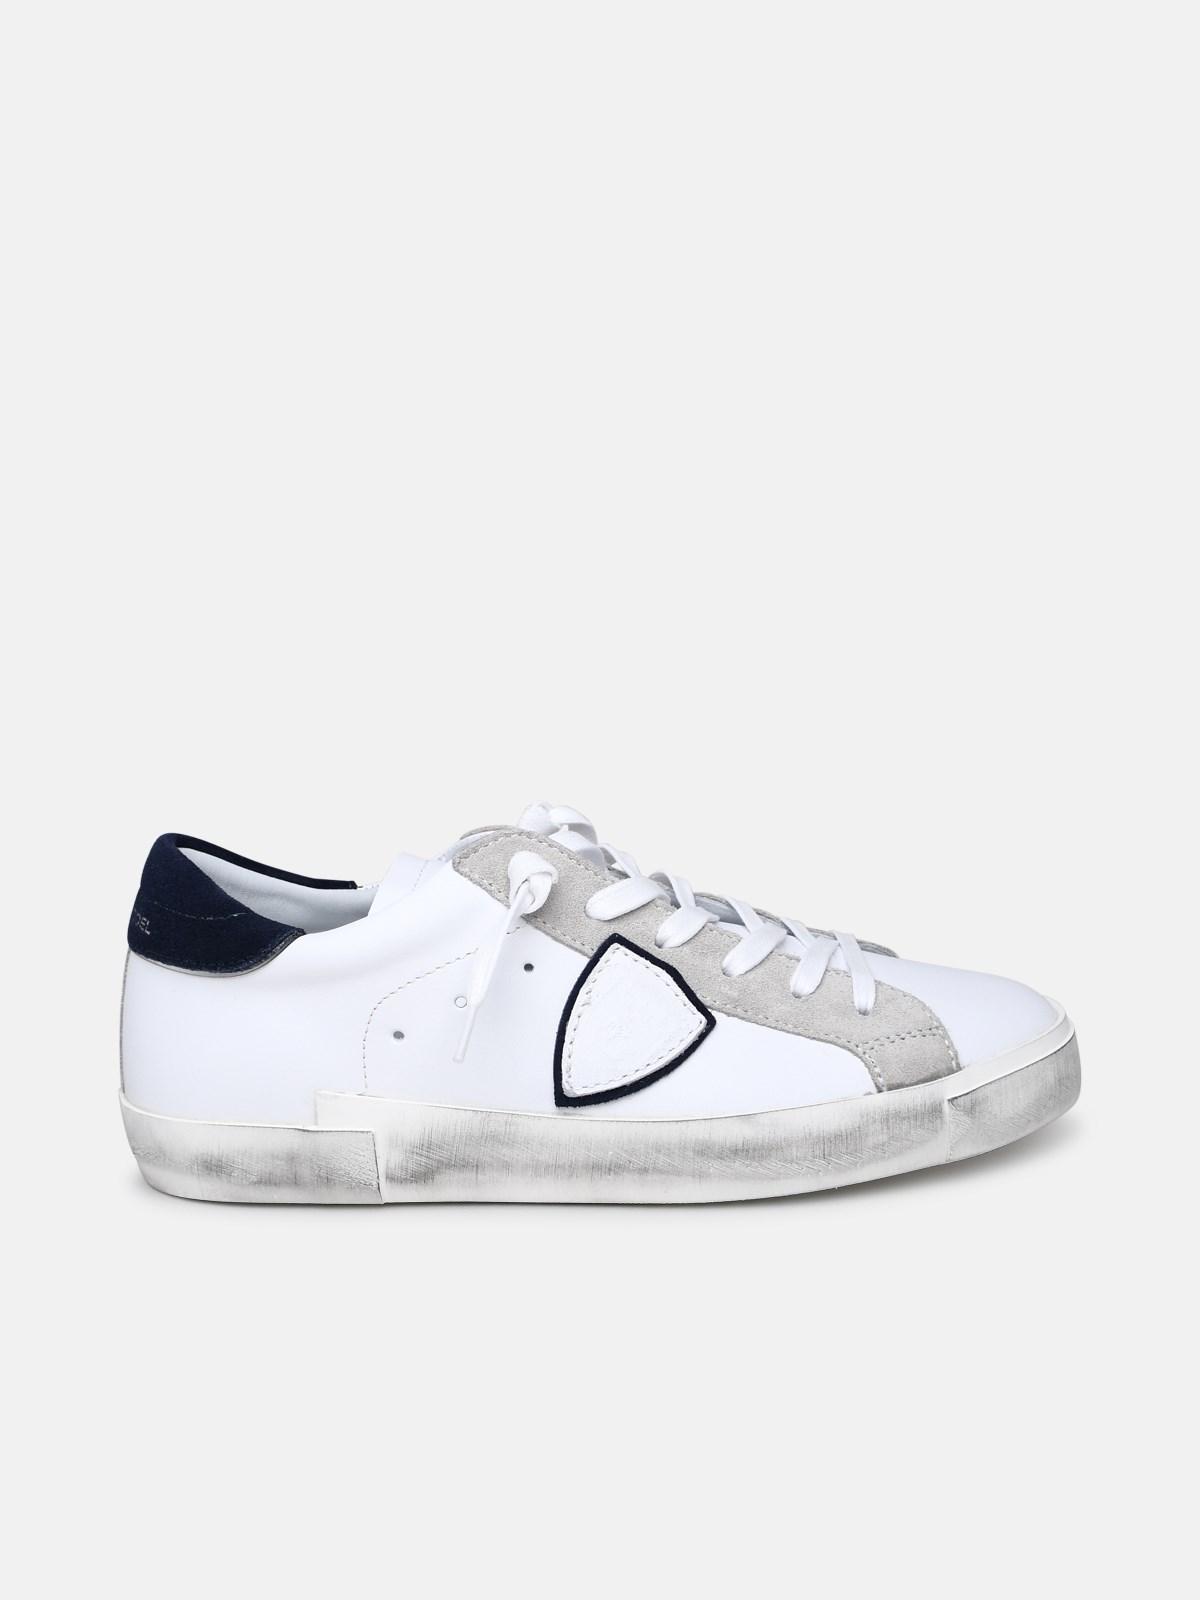 Philippe Model Prsx Sneakers In Leather in White for Men | Lyst